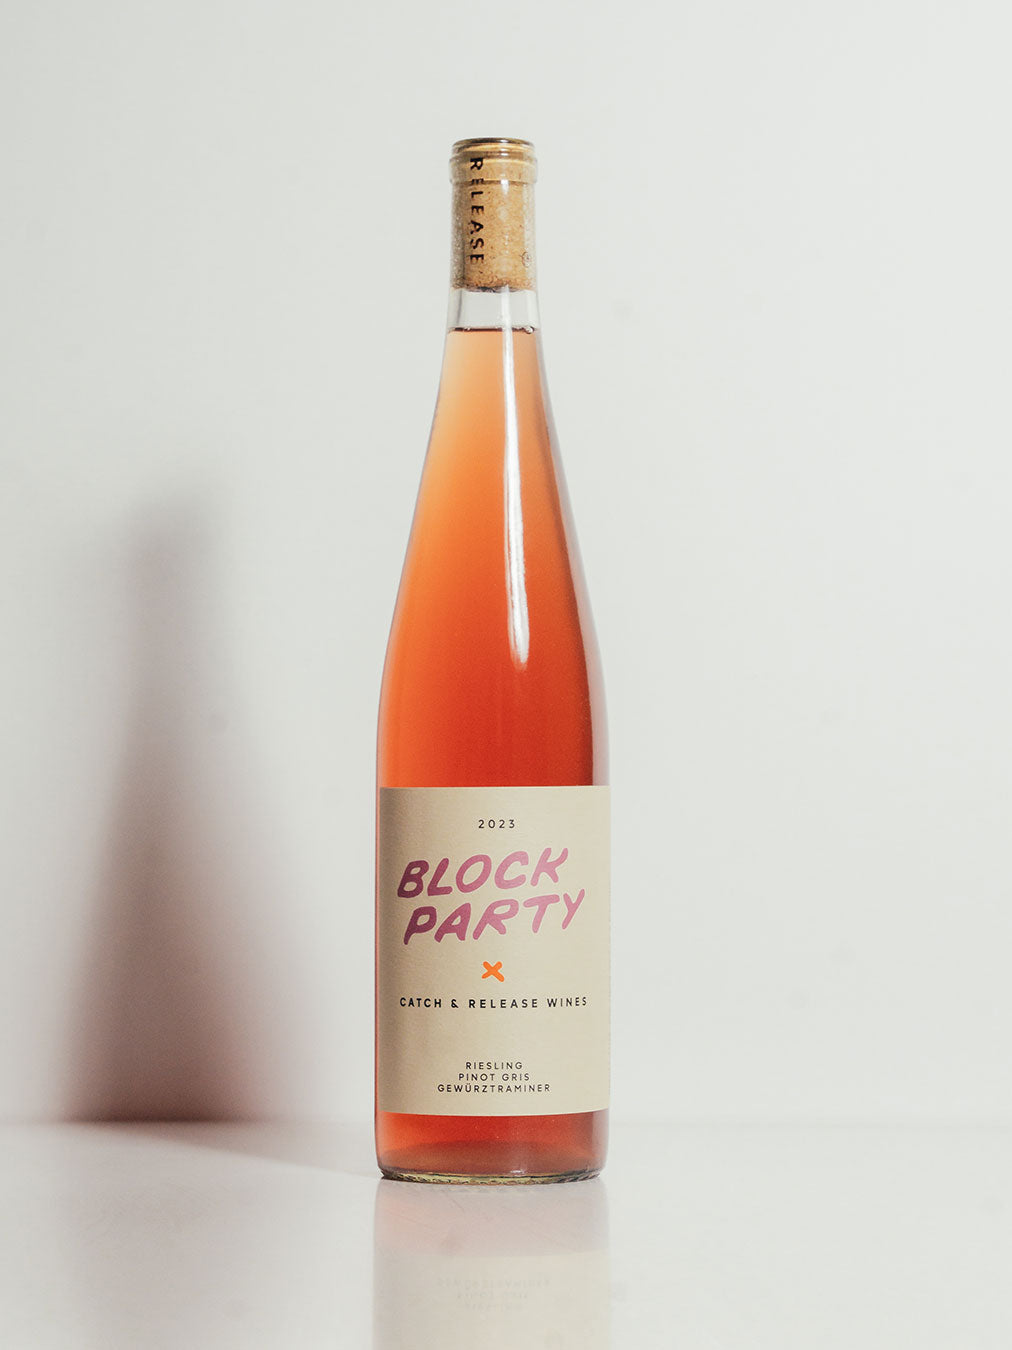 Catch & Release Wines 2023 Block Party Orange Wine, made from organic Riesling, Pinot Gris, & Gewürztraminer.